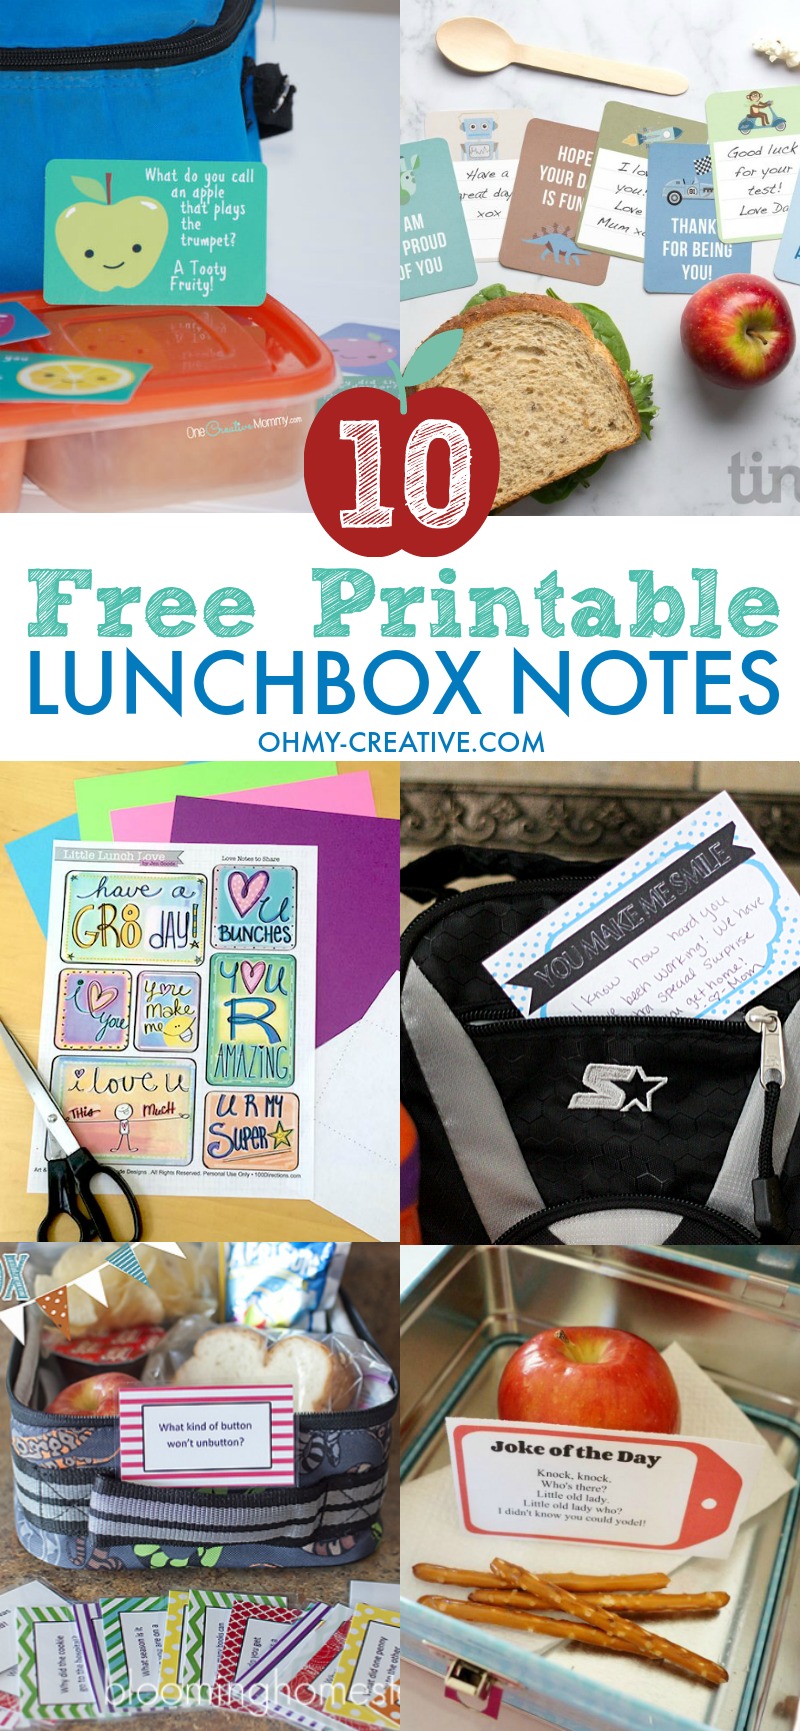 10 Free Printable Lunch Box Notes | OHMY-CREATIVE.COM | School Lunch Printable Notes | Kids Lunches | Lunchbox Notes | Free Kids Printables | Lunch Box Jokes Printables | Back To School Lunch Box Notes | Free Printable Lunchbox Notes